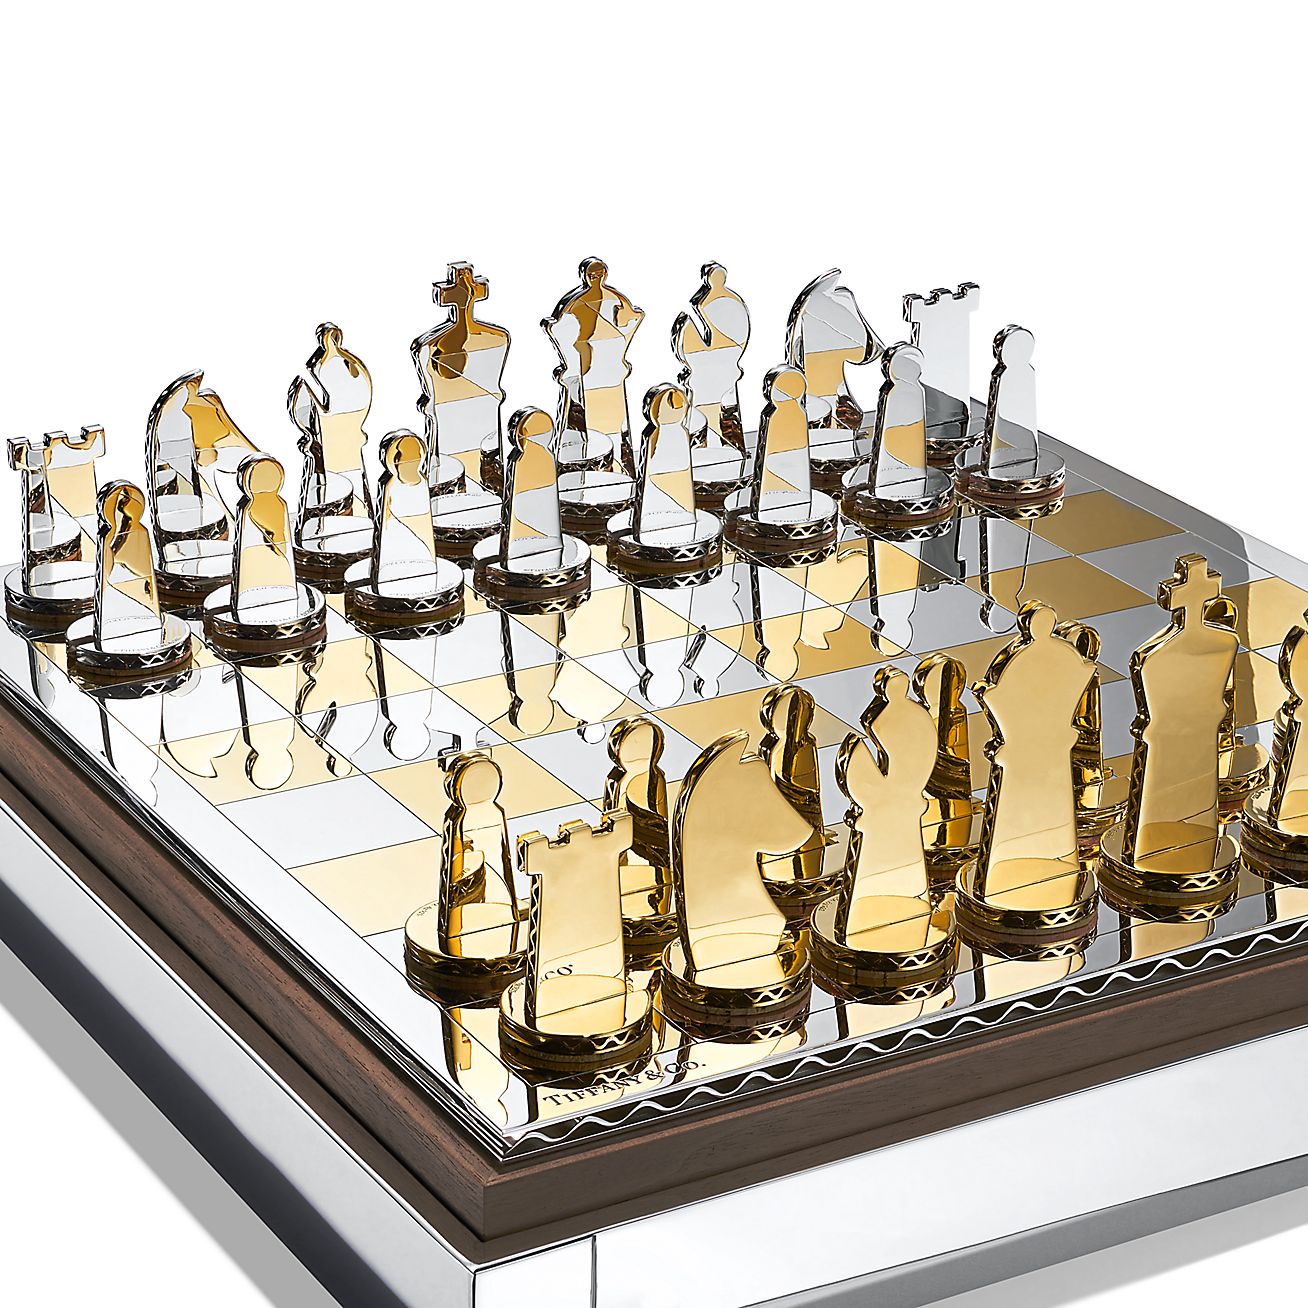 Everyday Objects sterling silver and 24k gold vermeil chess set.